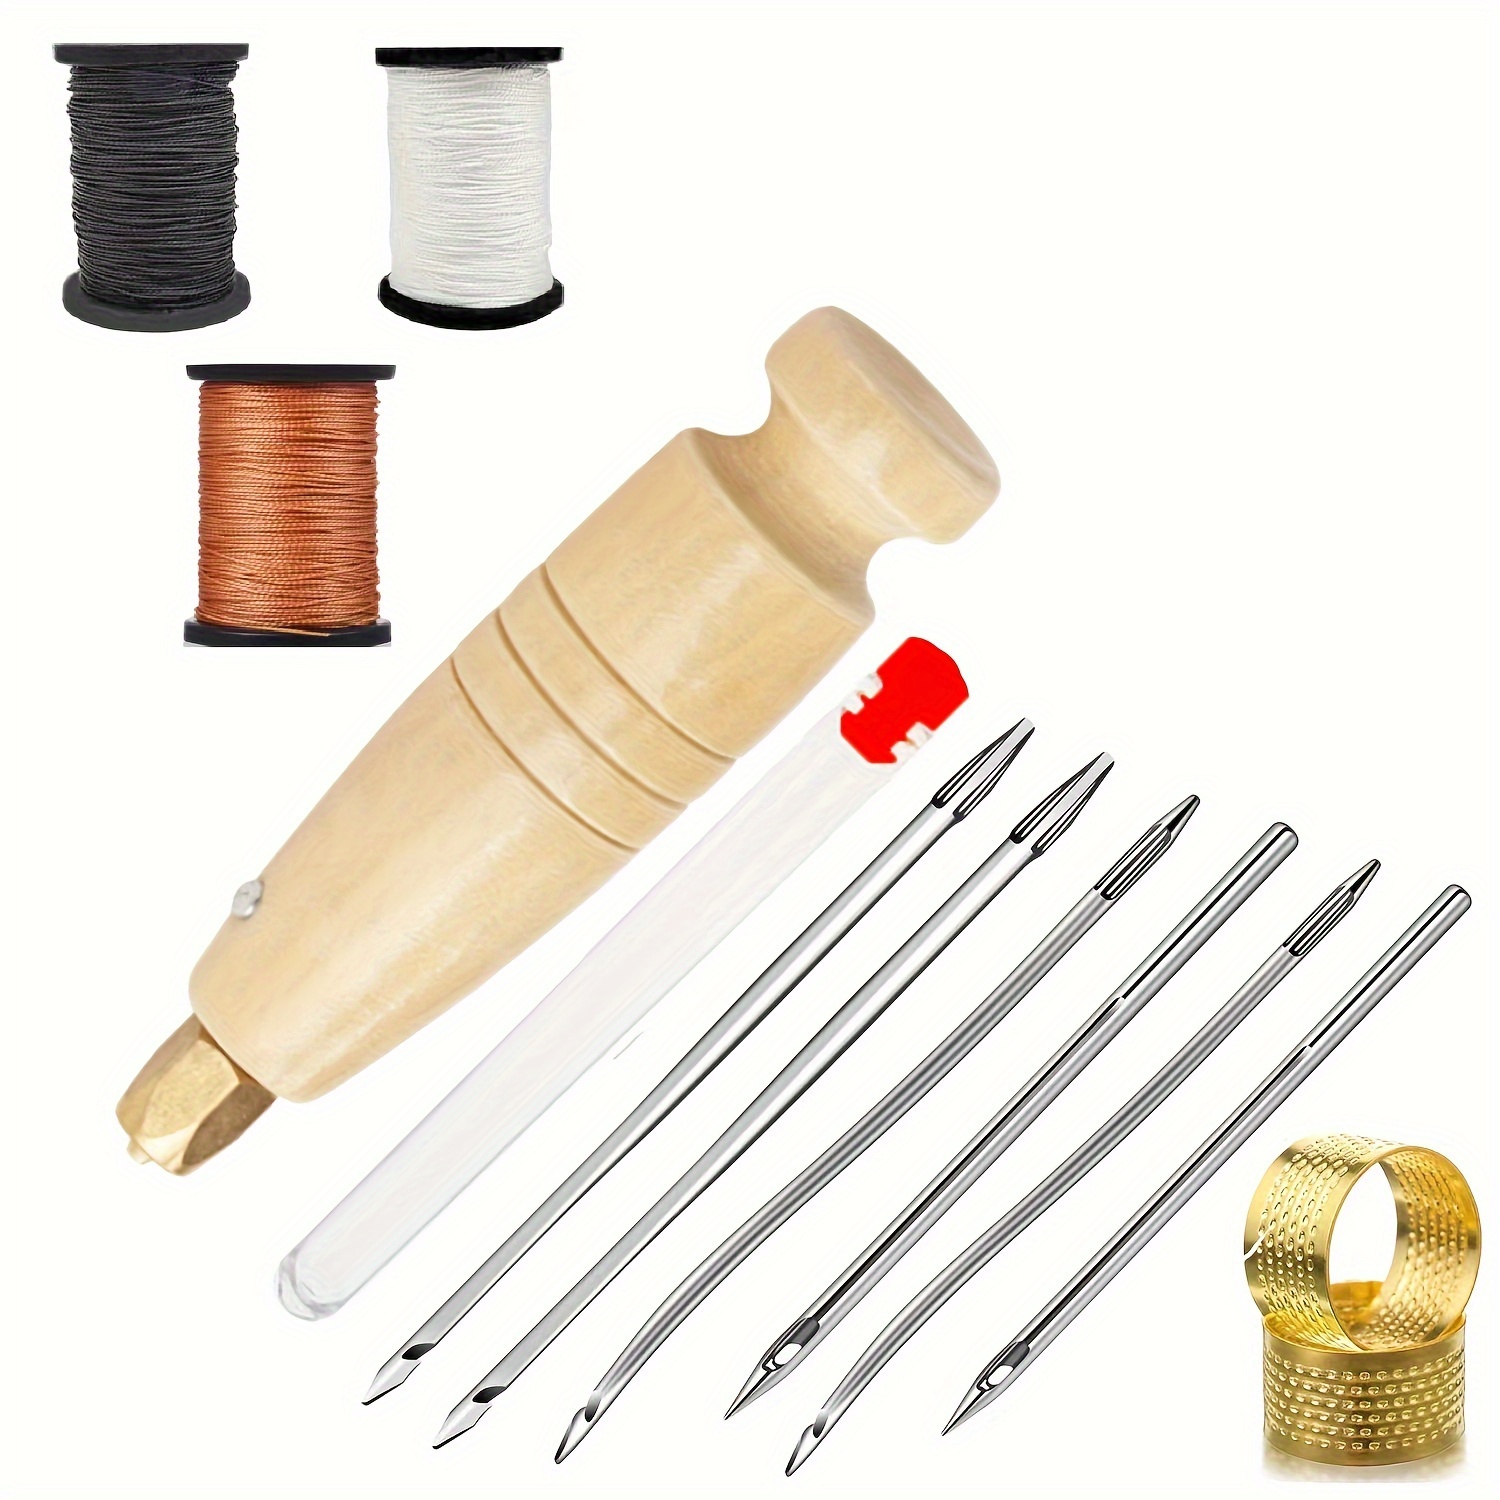 

13pcs/set Leather Sewing Kit Diy Leather Sewing Awl Needle With Wooden Handle Set Leather Canvas Tent Shoes Repairing Tool With Nylon Thread